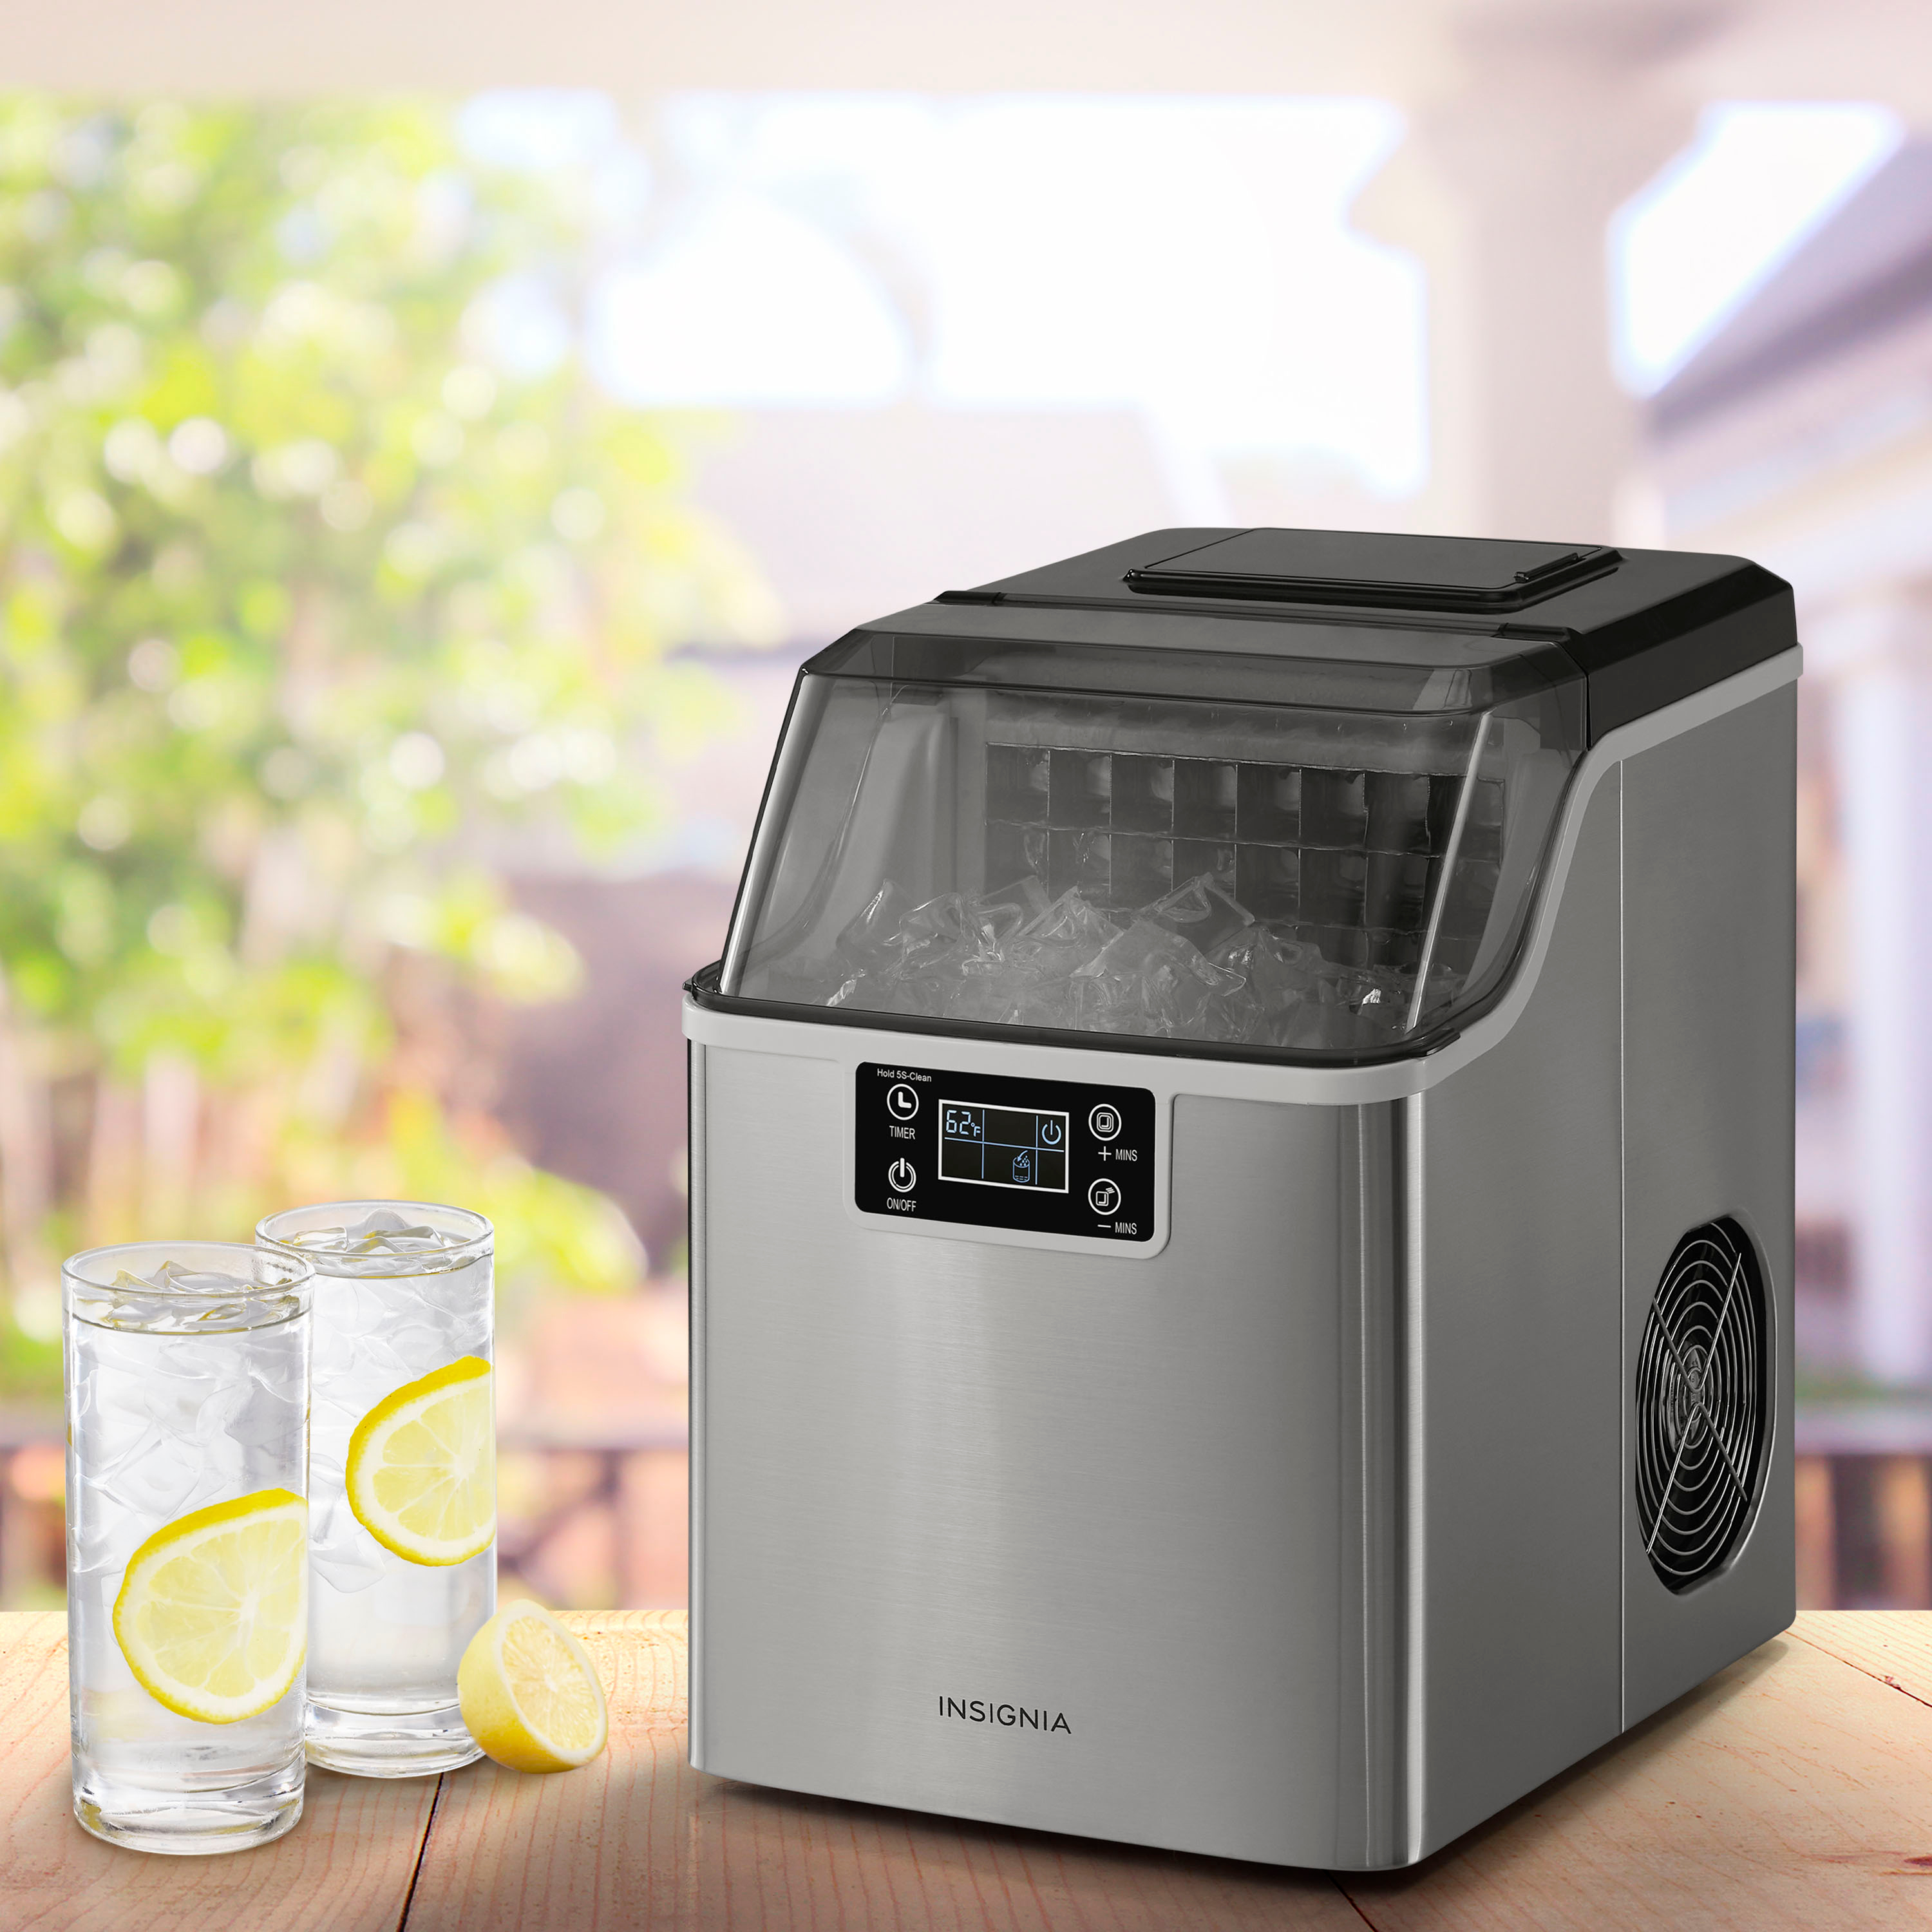 Insignia Portable Icemaker 33 lb. With Auto Shut-Off $99.99 (Reg. $179.99)  + Free Shipping at Best Buy